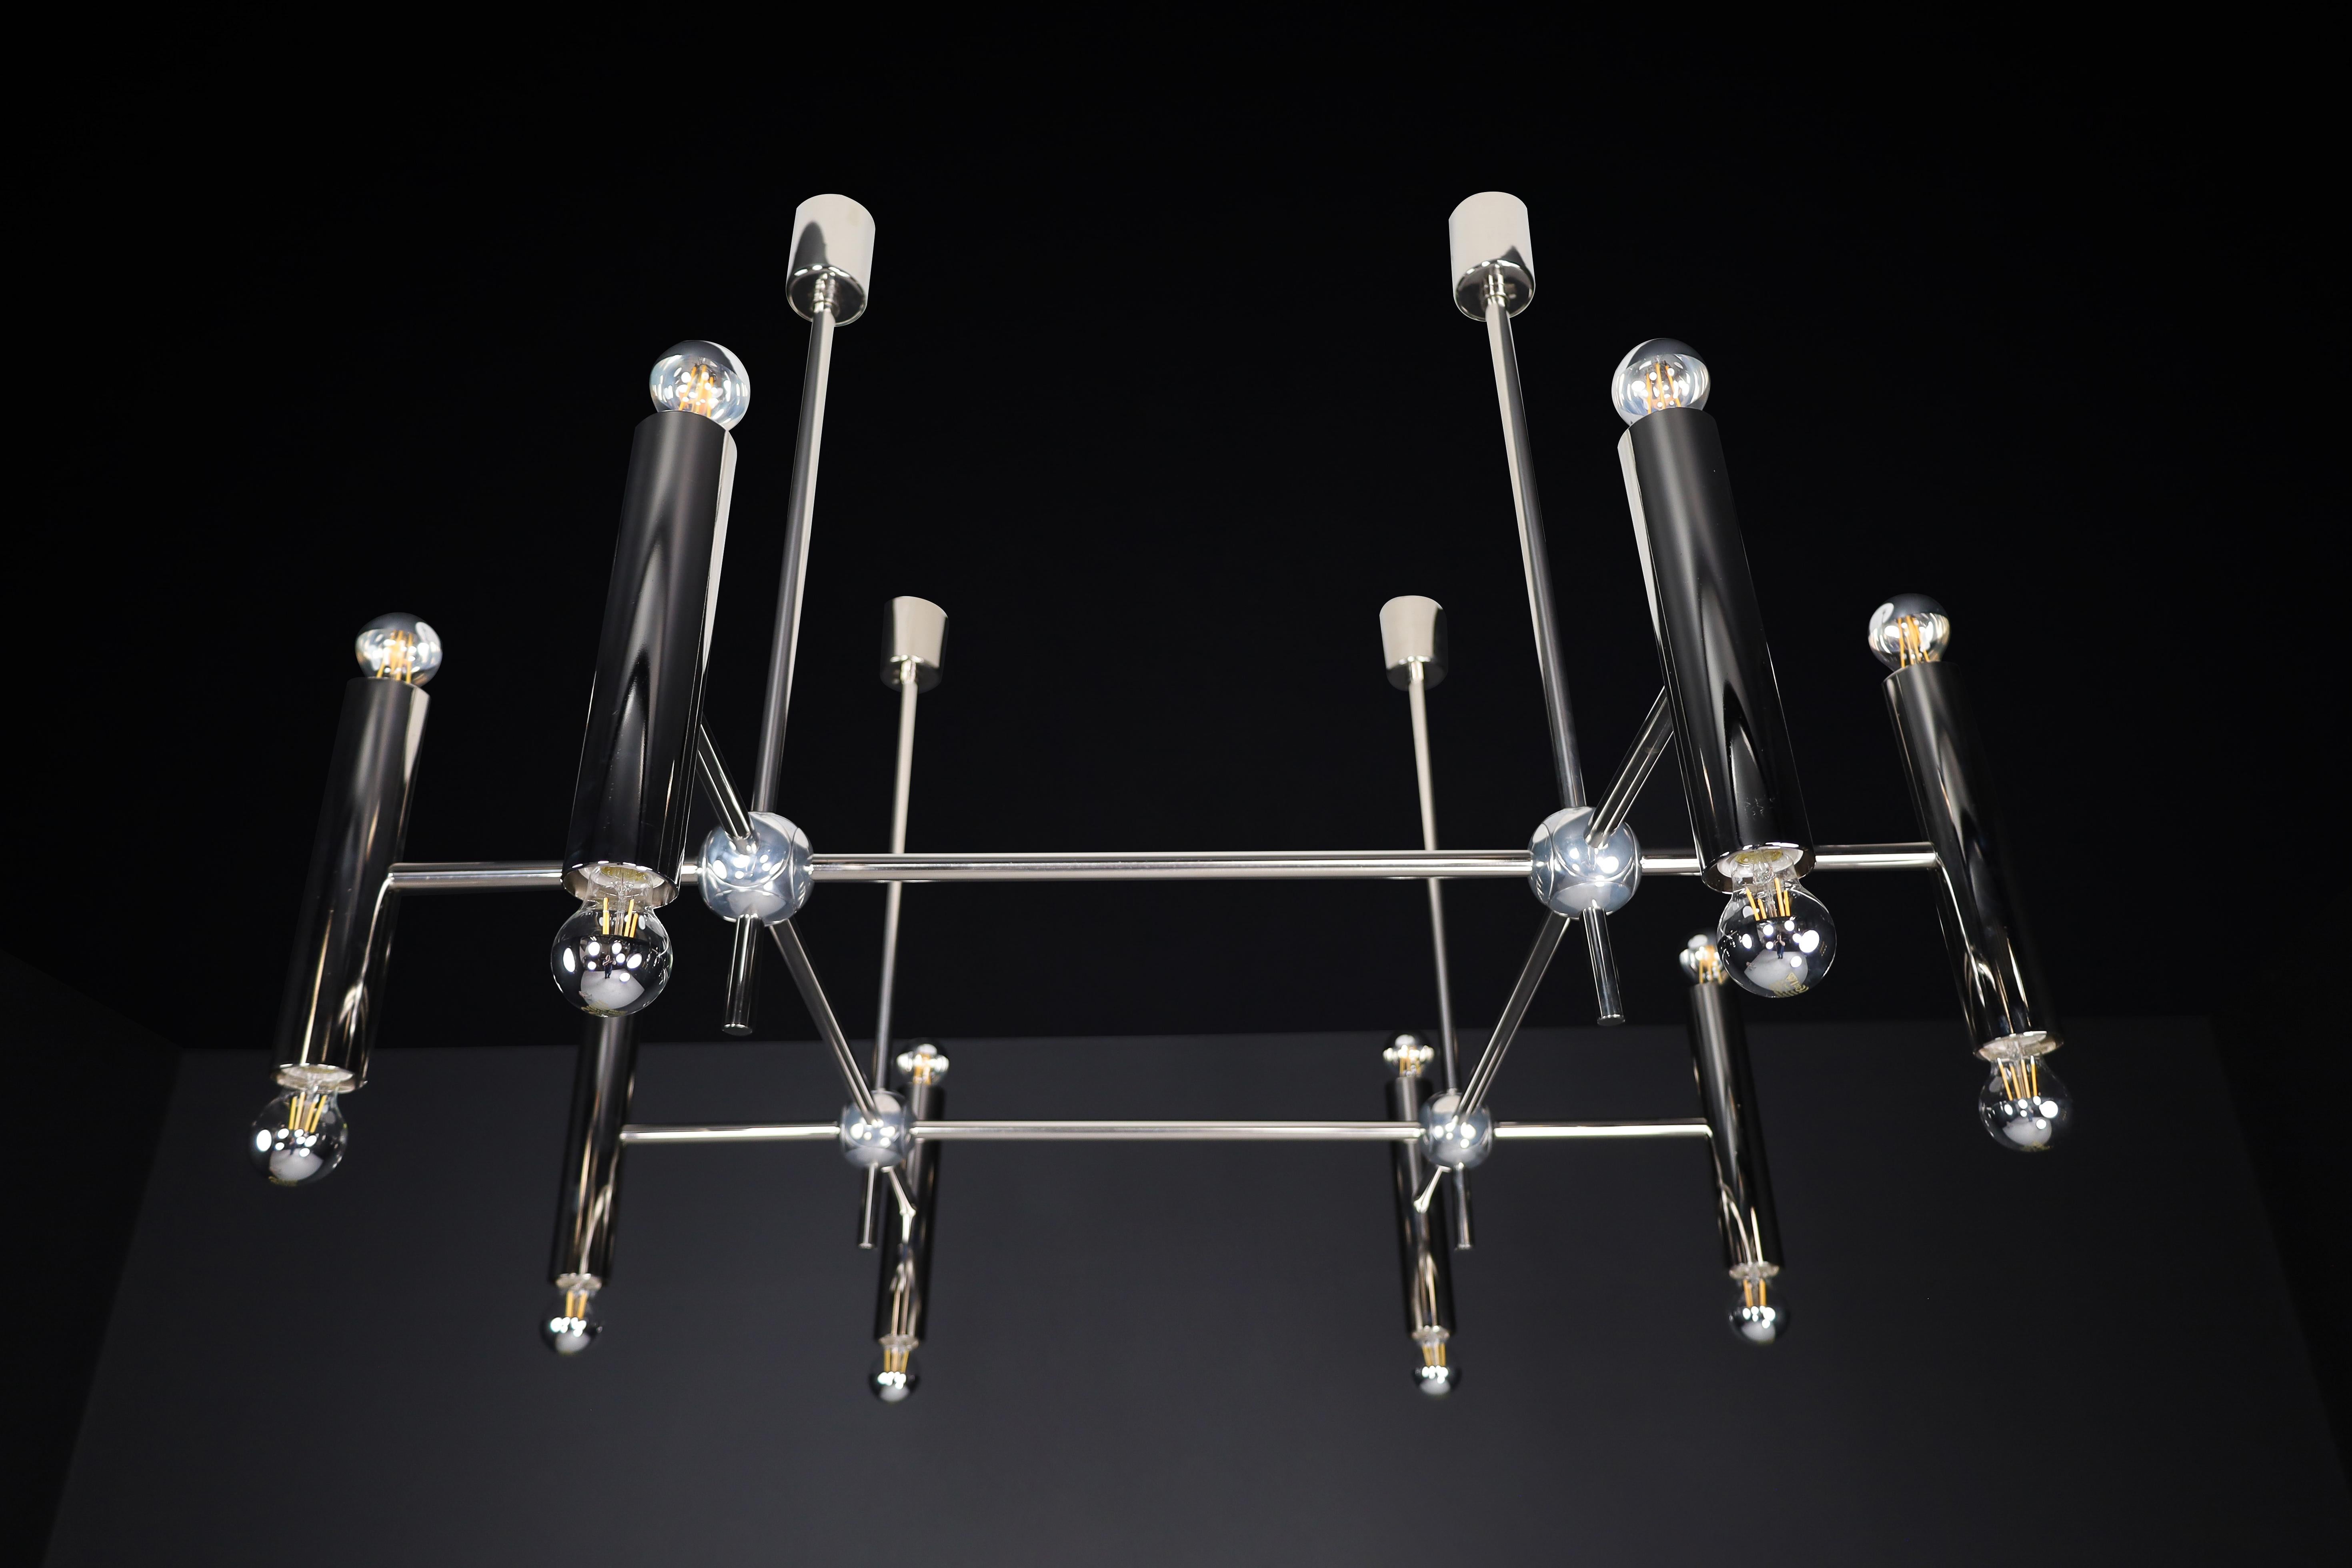 Aluminum Grande Chandelier in Polished Steel with 16 Lights, Germany, 1960s For Sale